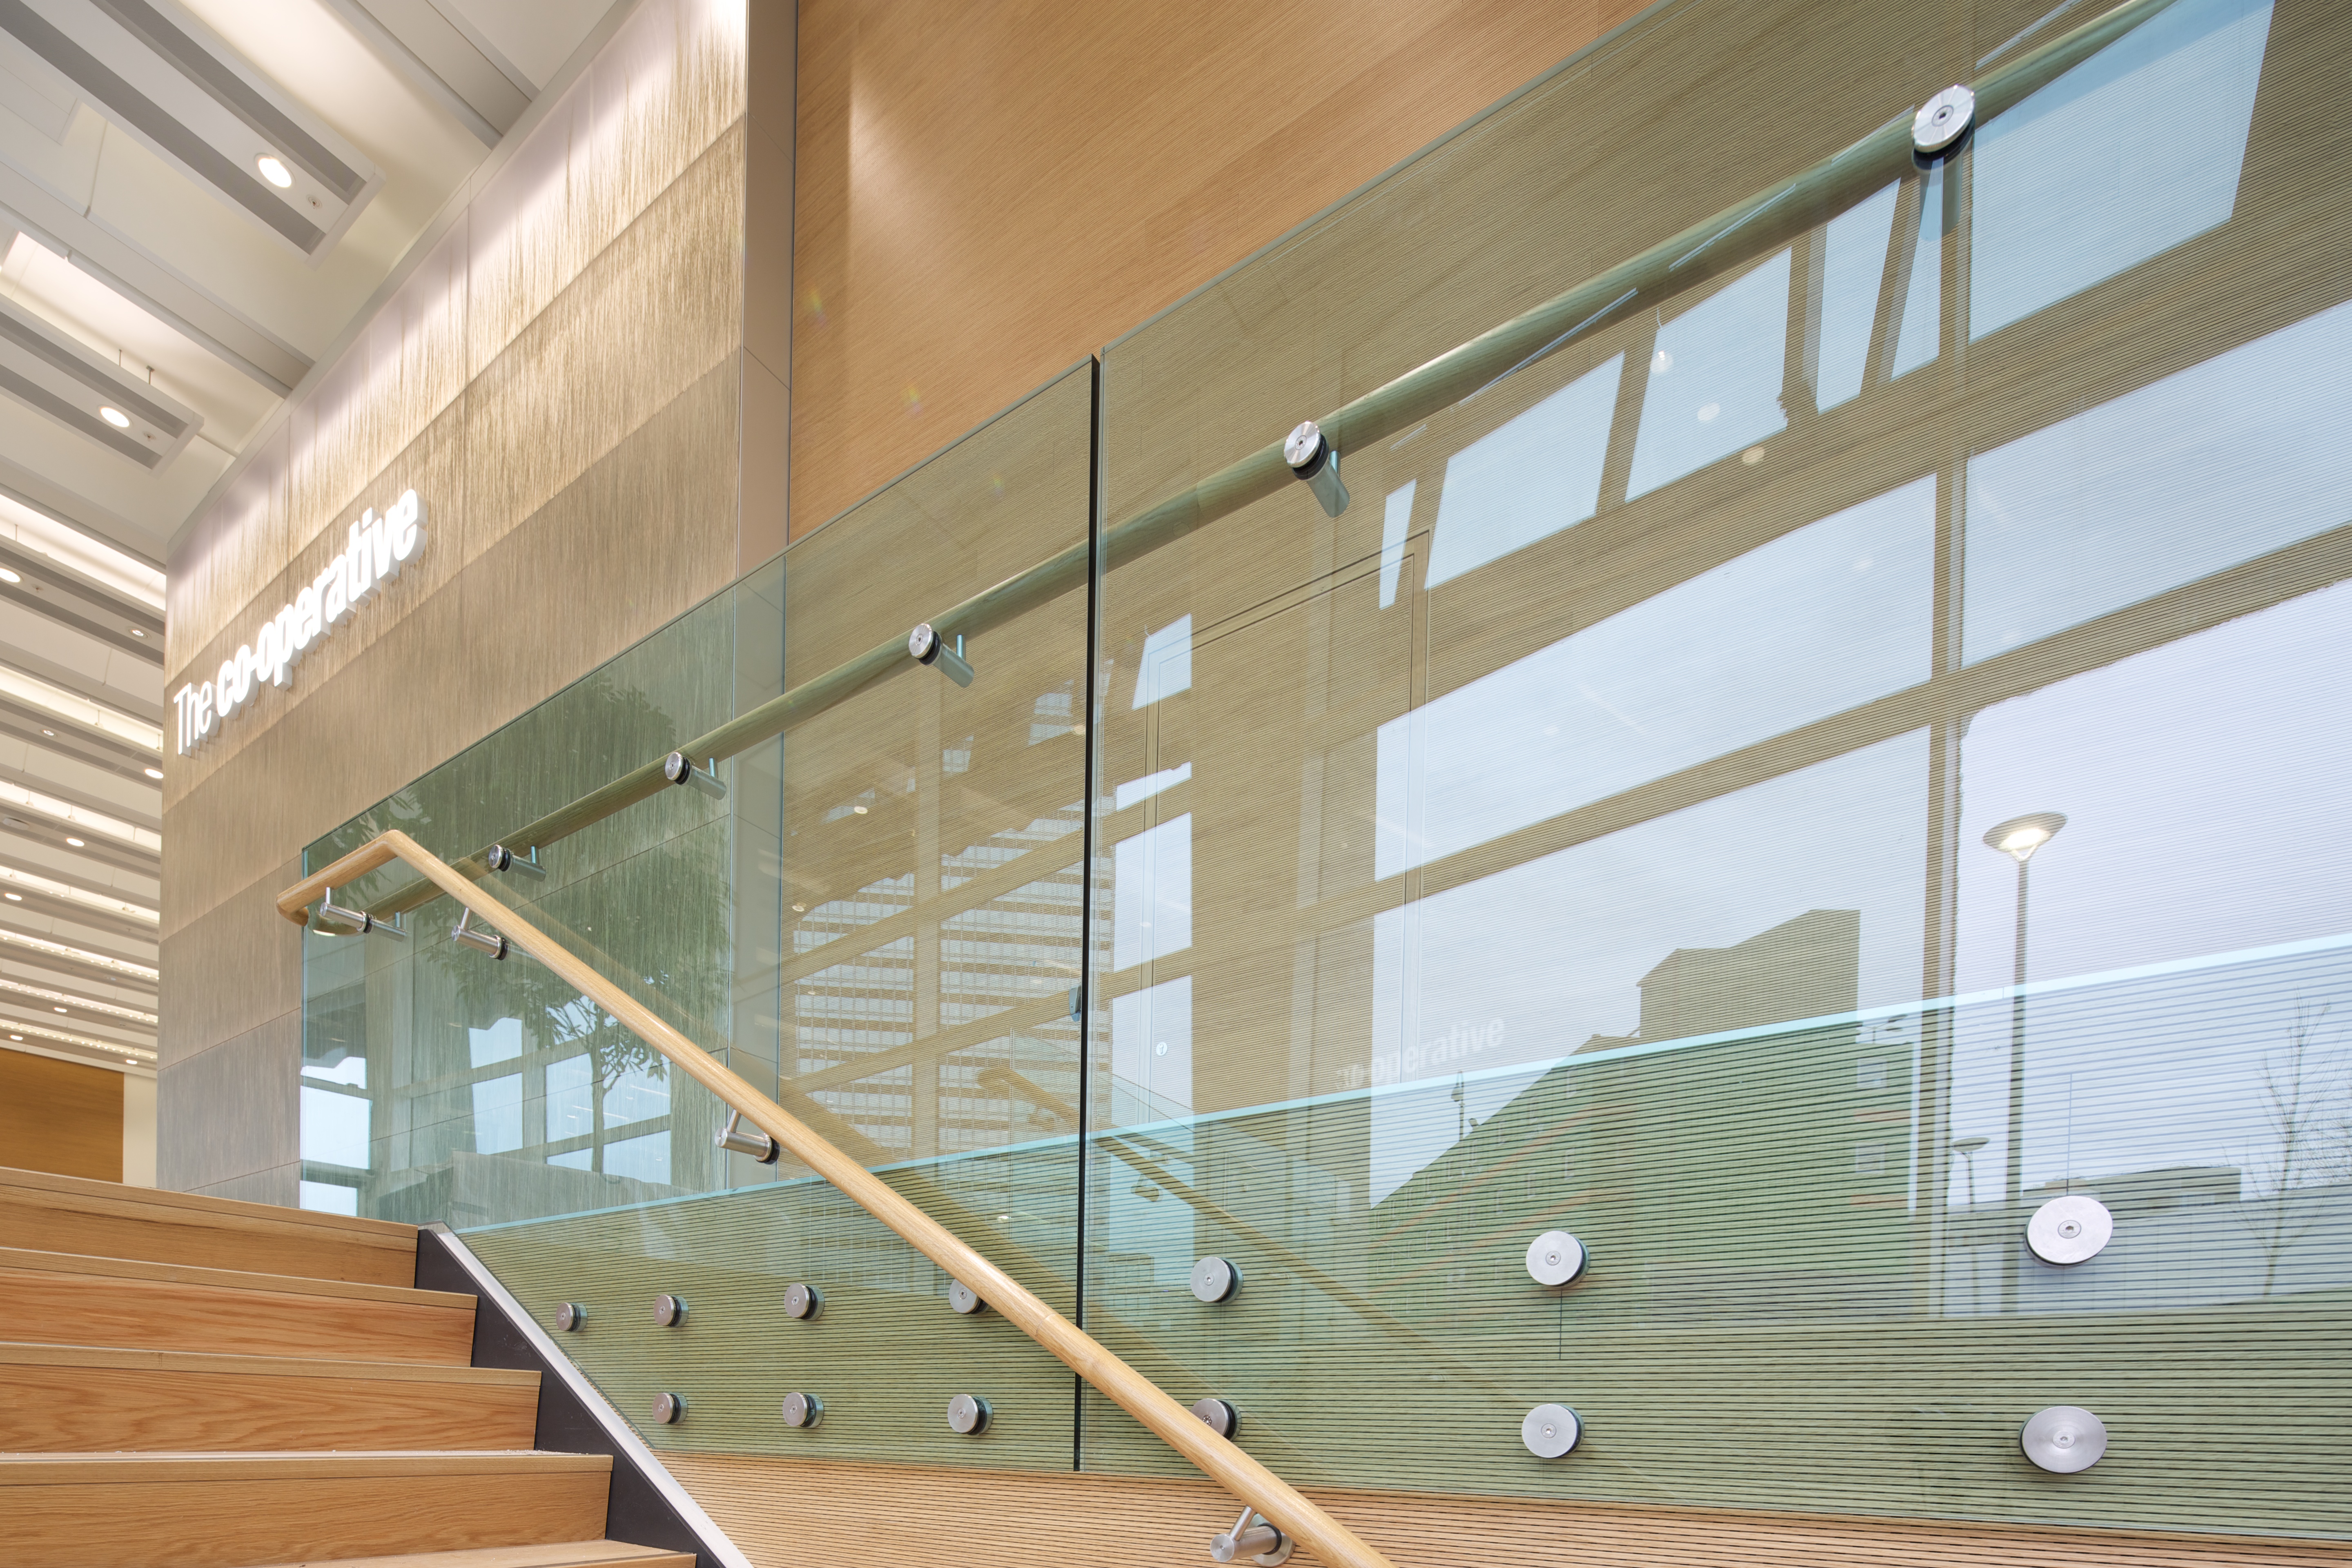 Extended glass (above the handrail)